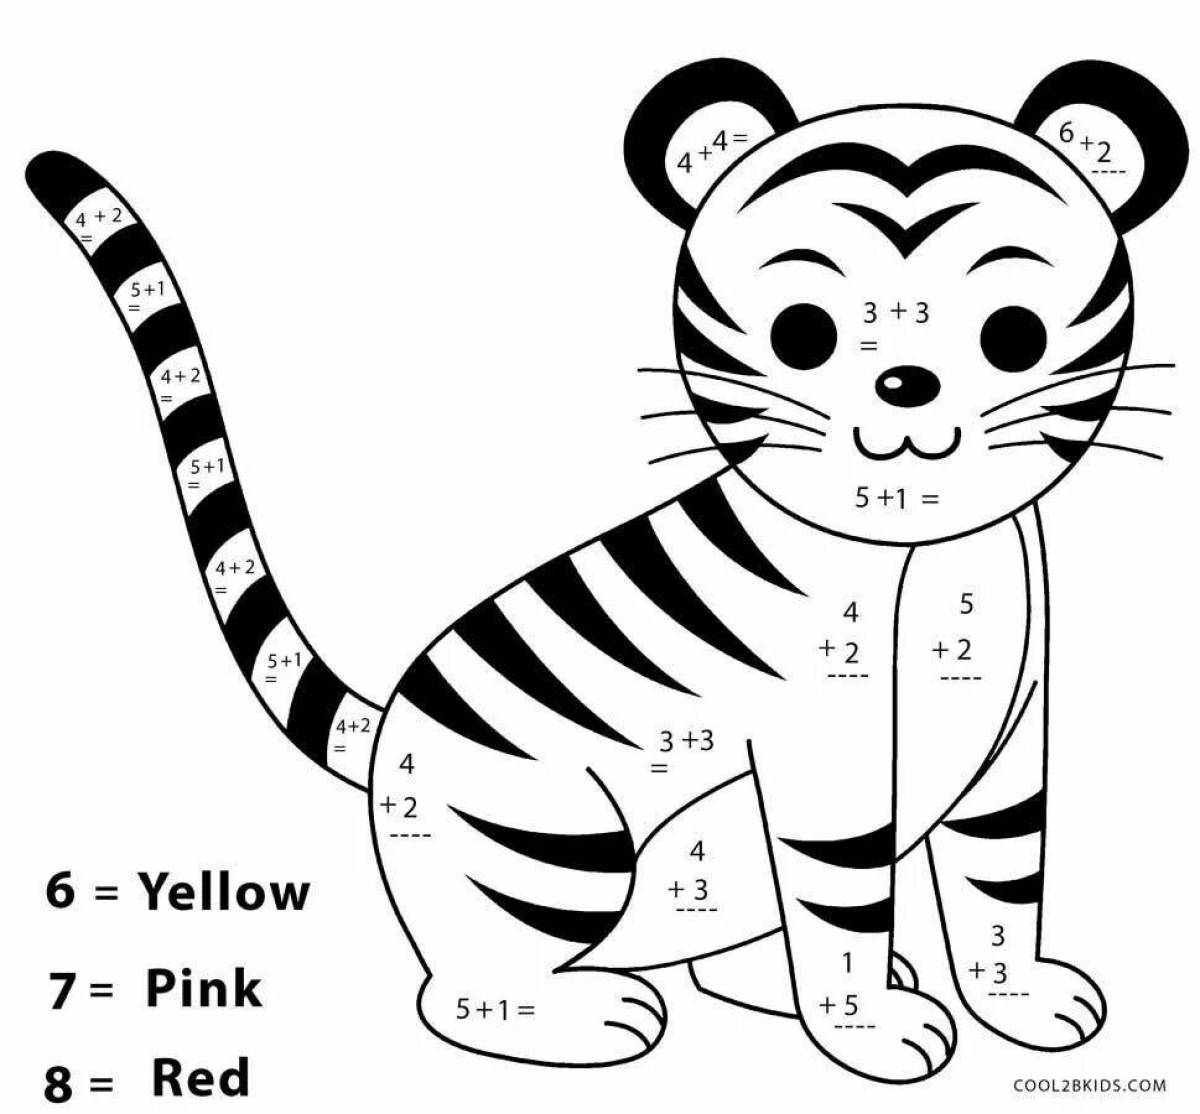 Animated tiger coloring book for children 6-7 years old